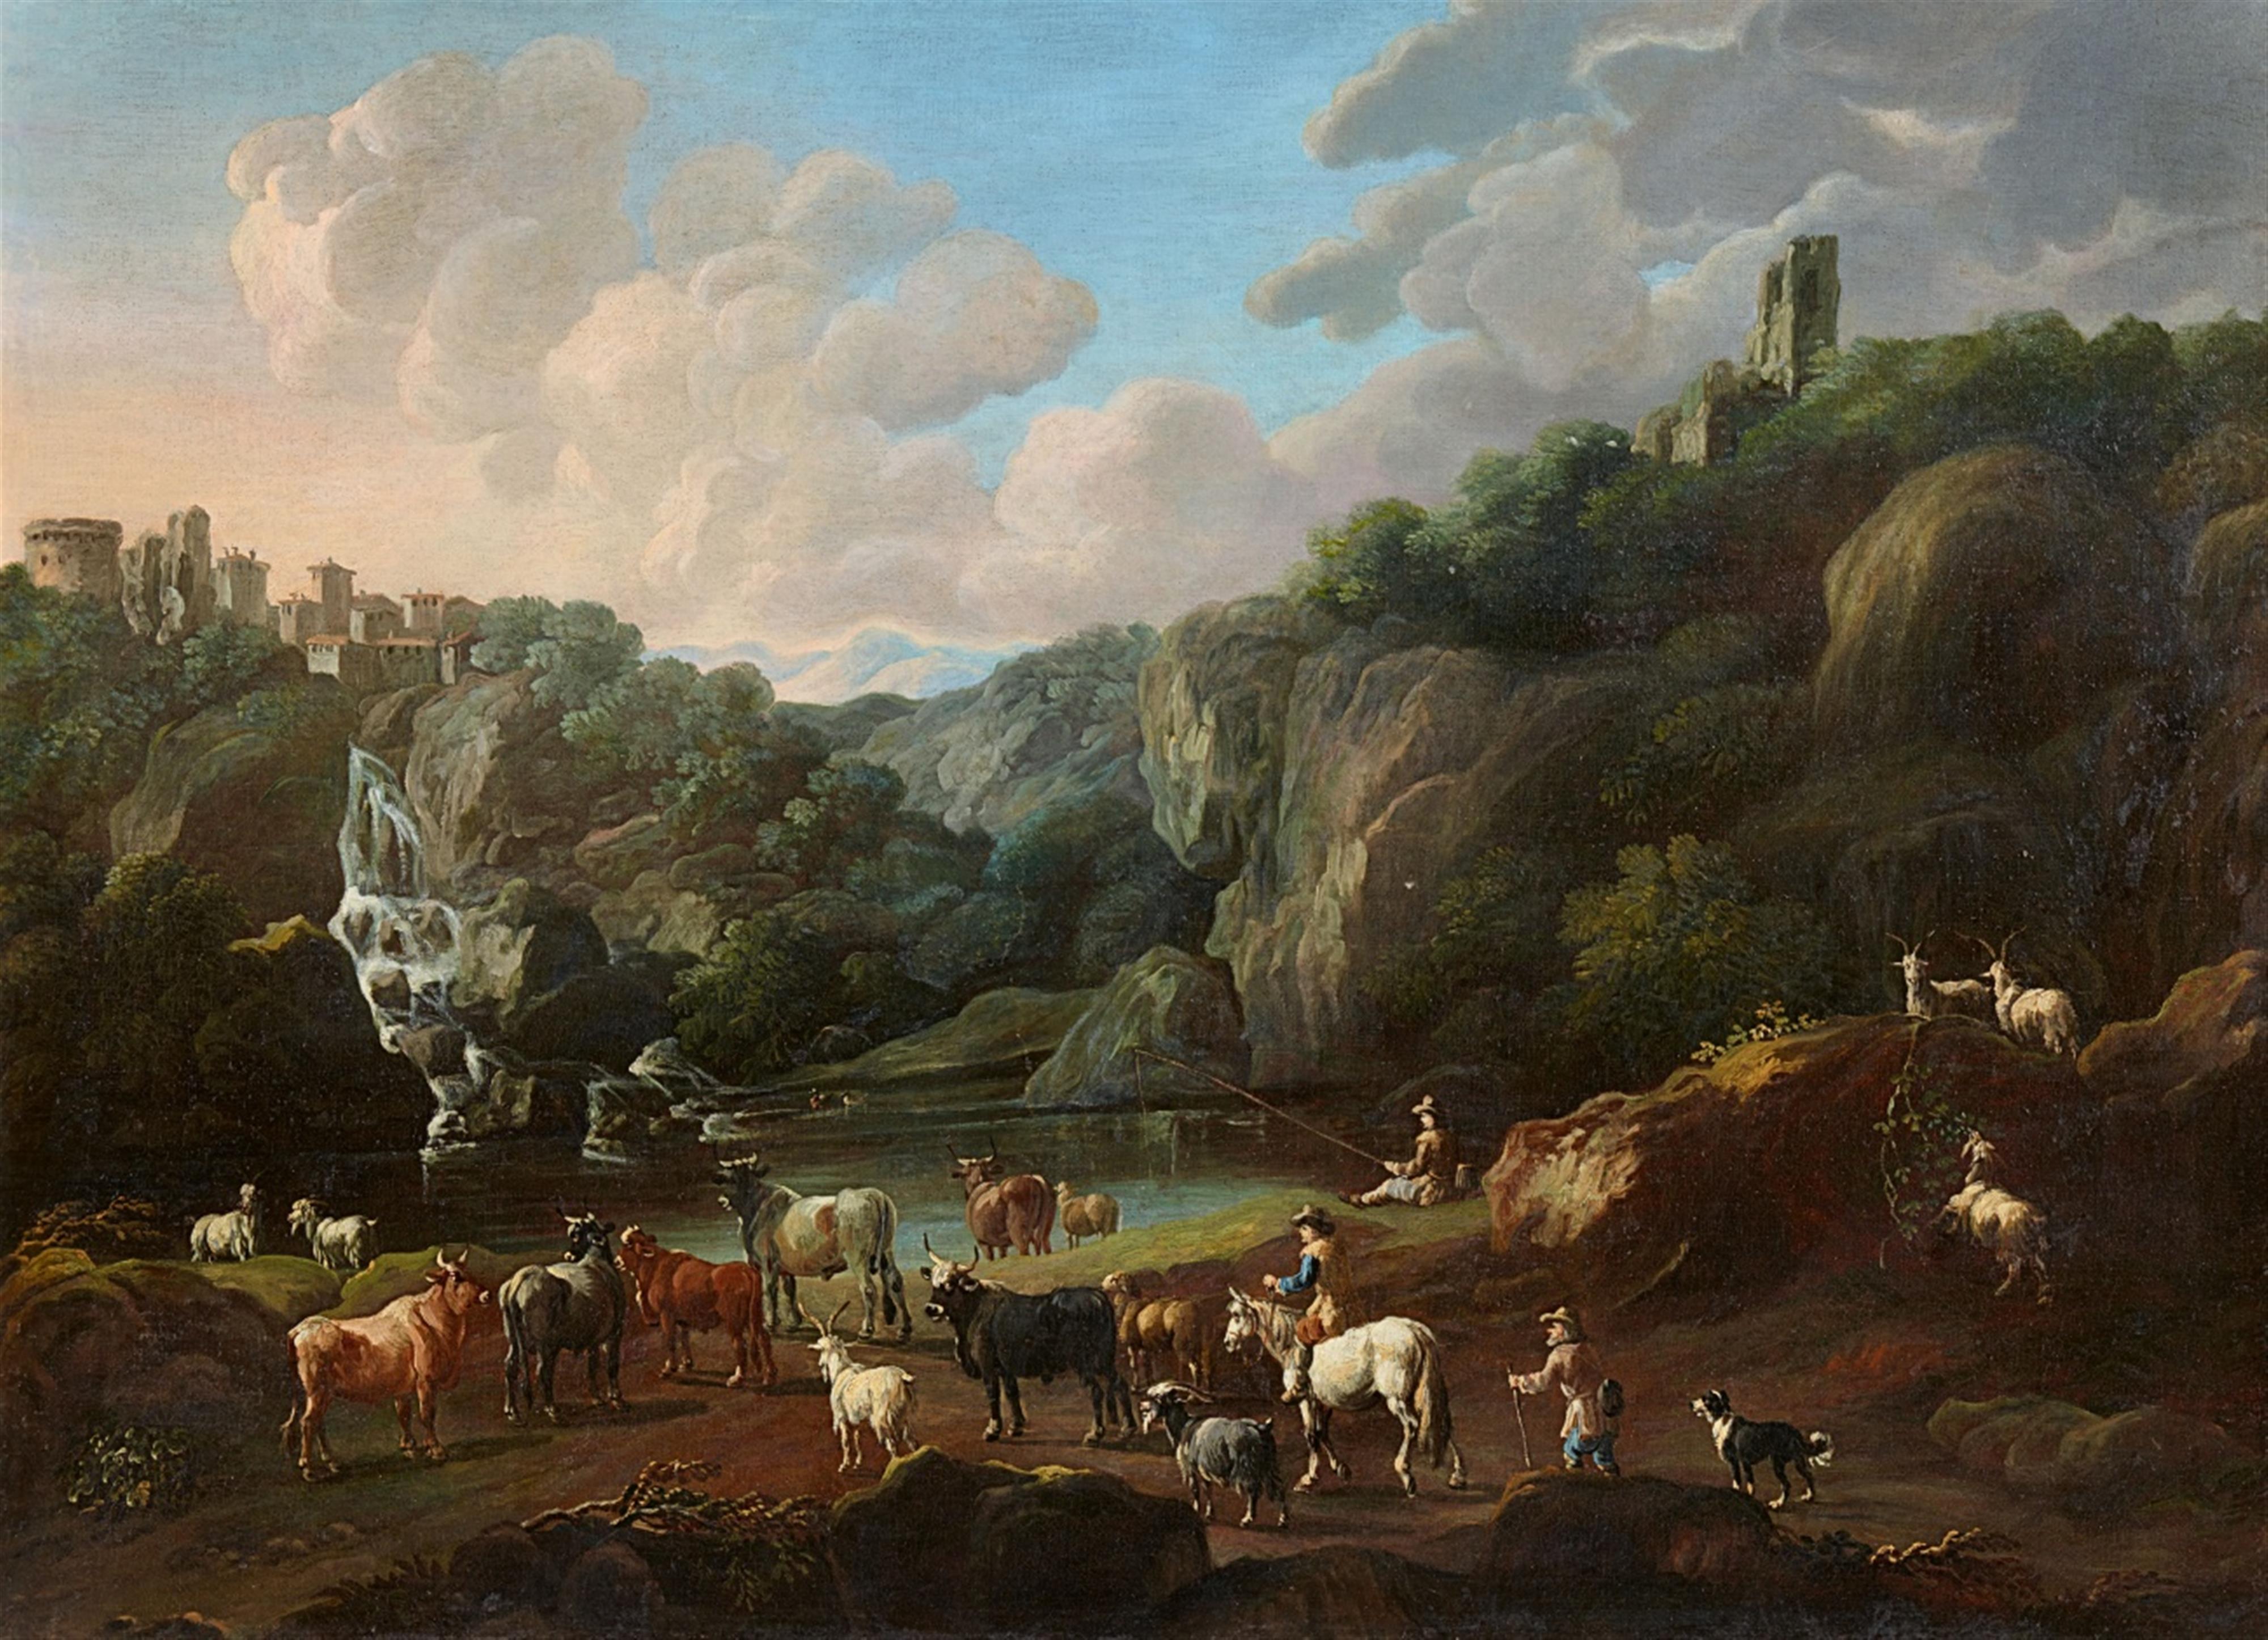 Cajetan Roos - Herd of Cattle and a Fisherman at a Mountain Lake - image-1